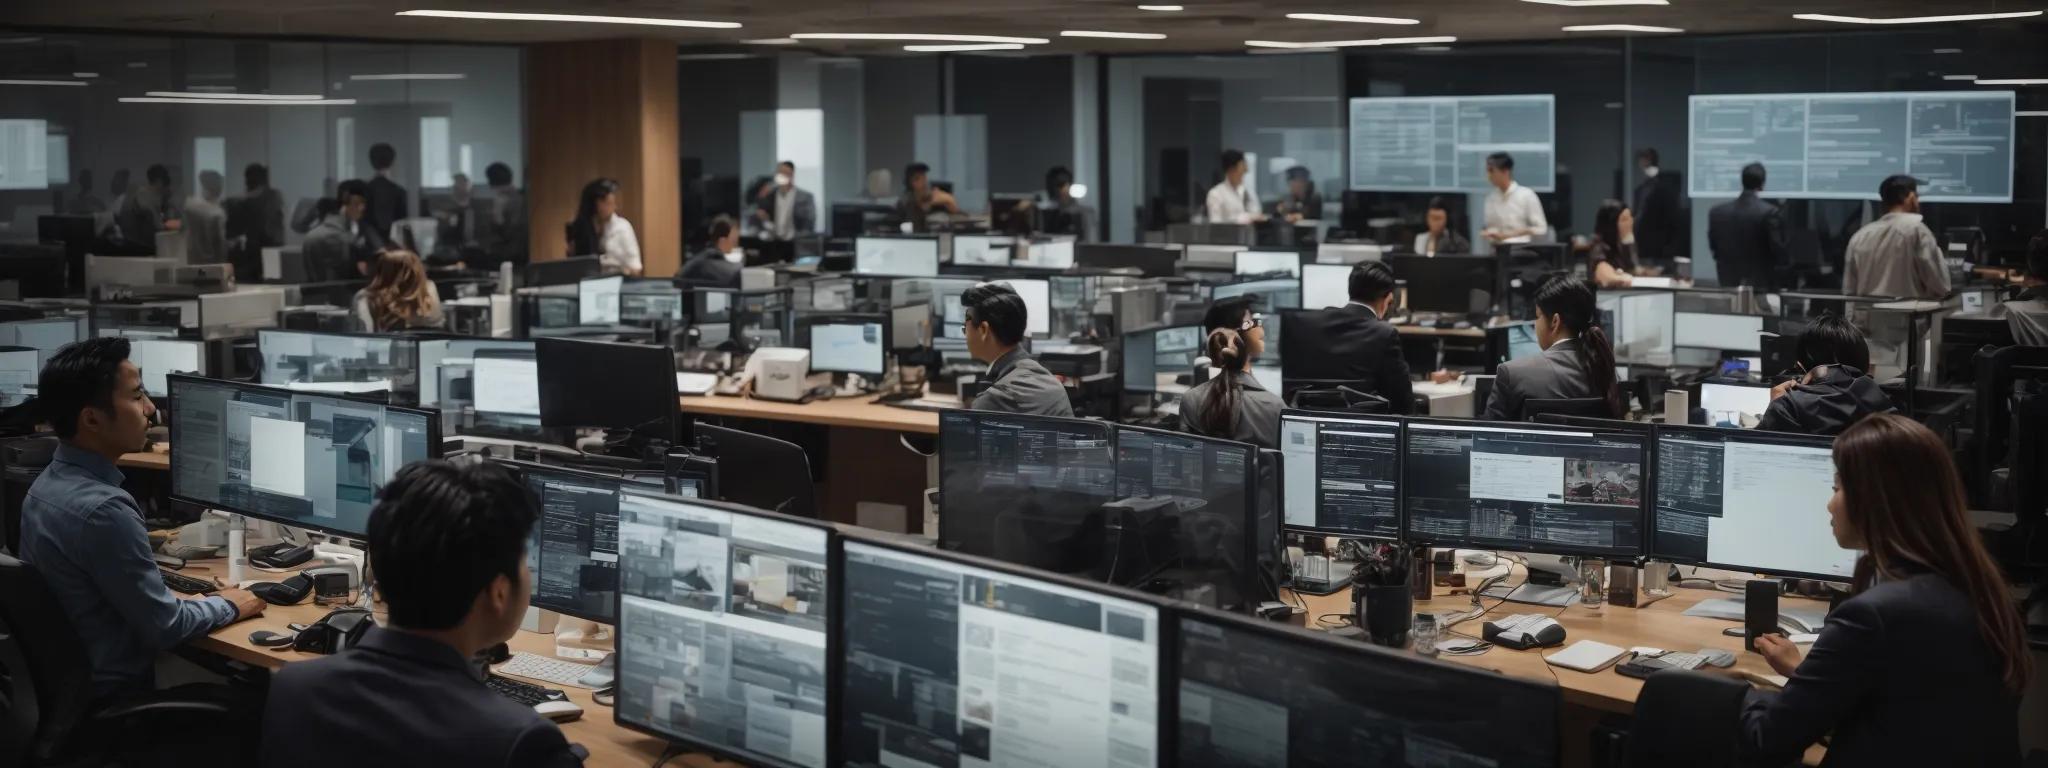 a bustling modern office with diverse team members intently focused on large computer screens showcasing social media analytics and customer feedback forums.